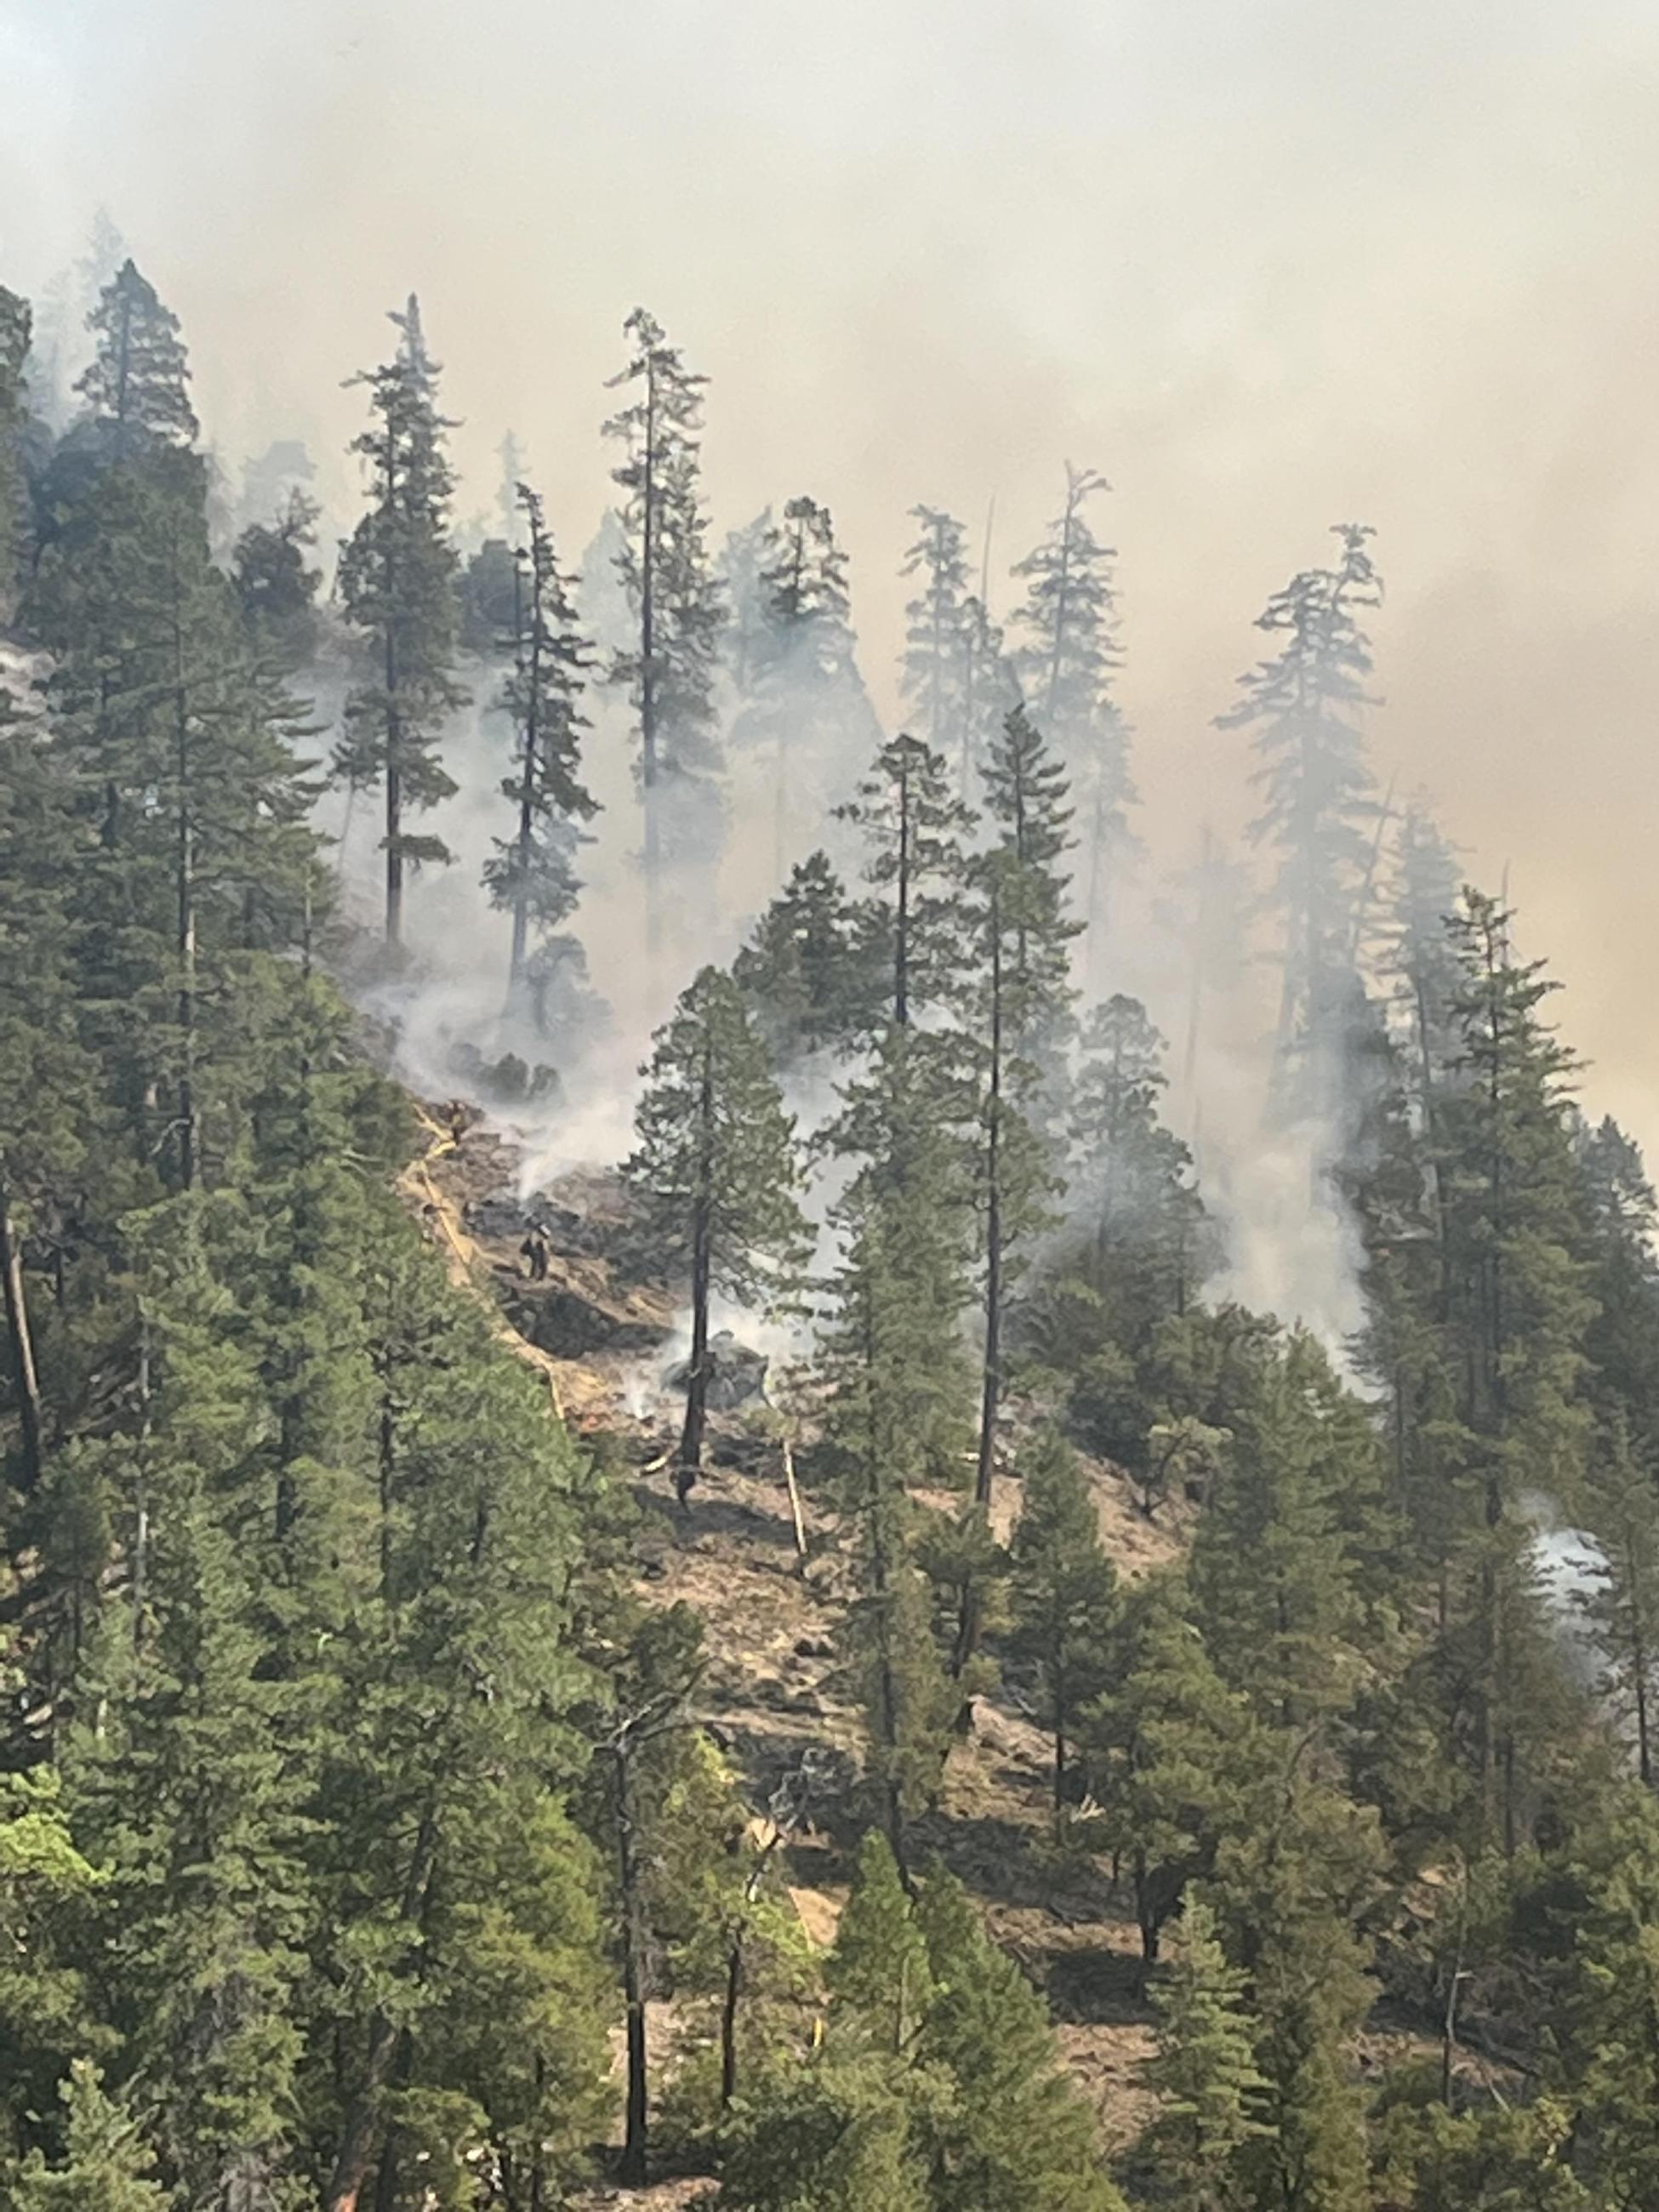 Image of smoke between the trees along a line with hose on a steep hillside. Photo USDA Forest Service courtesy K. Julian